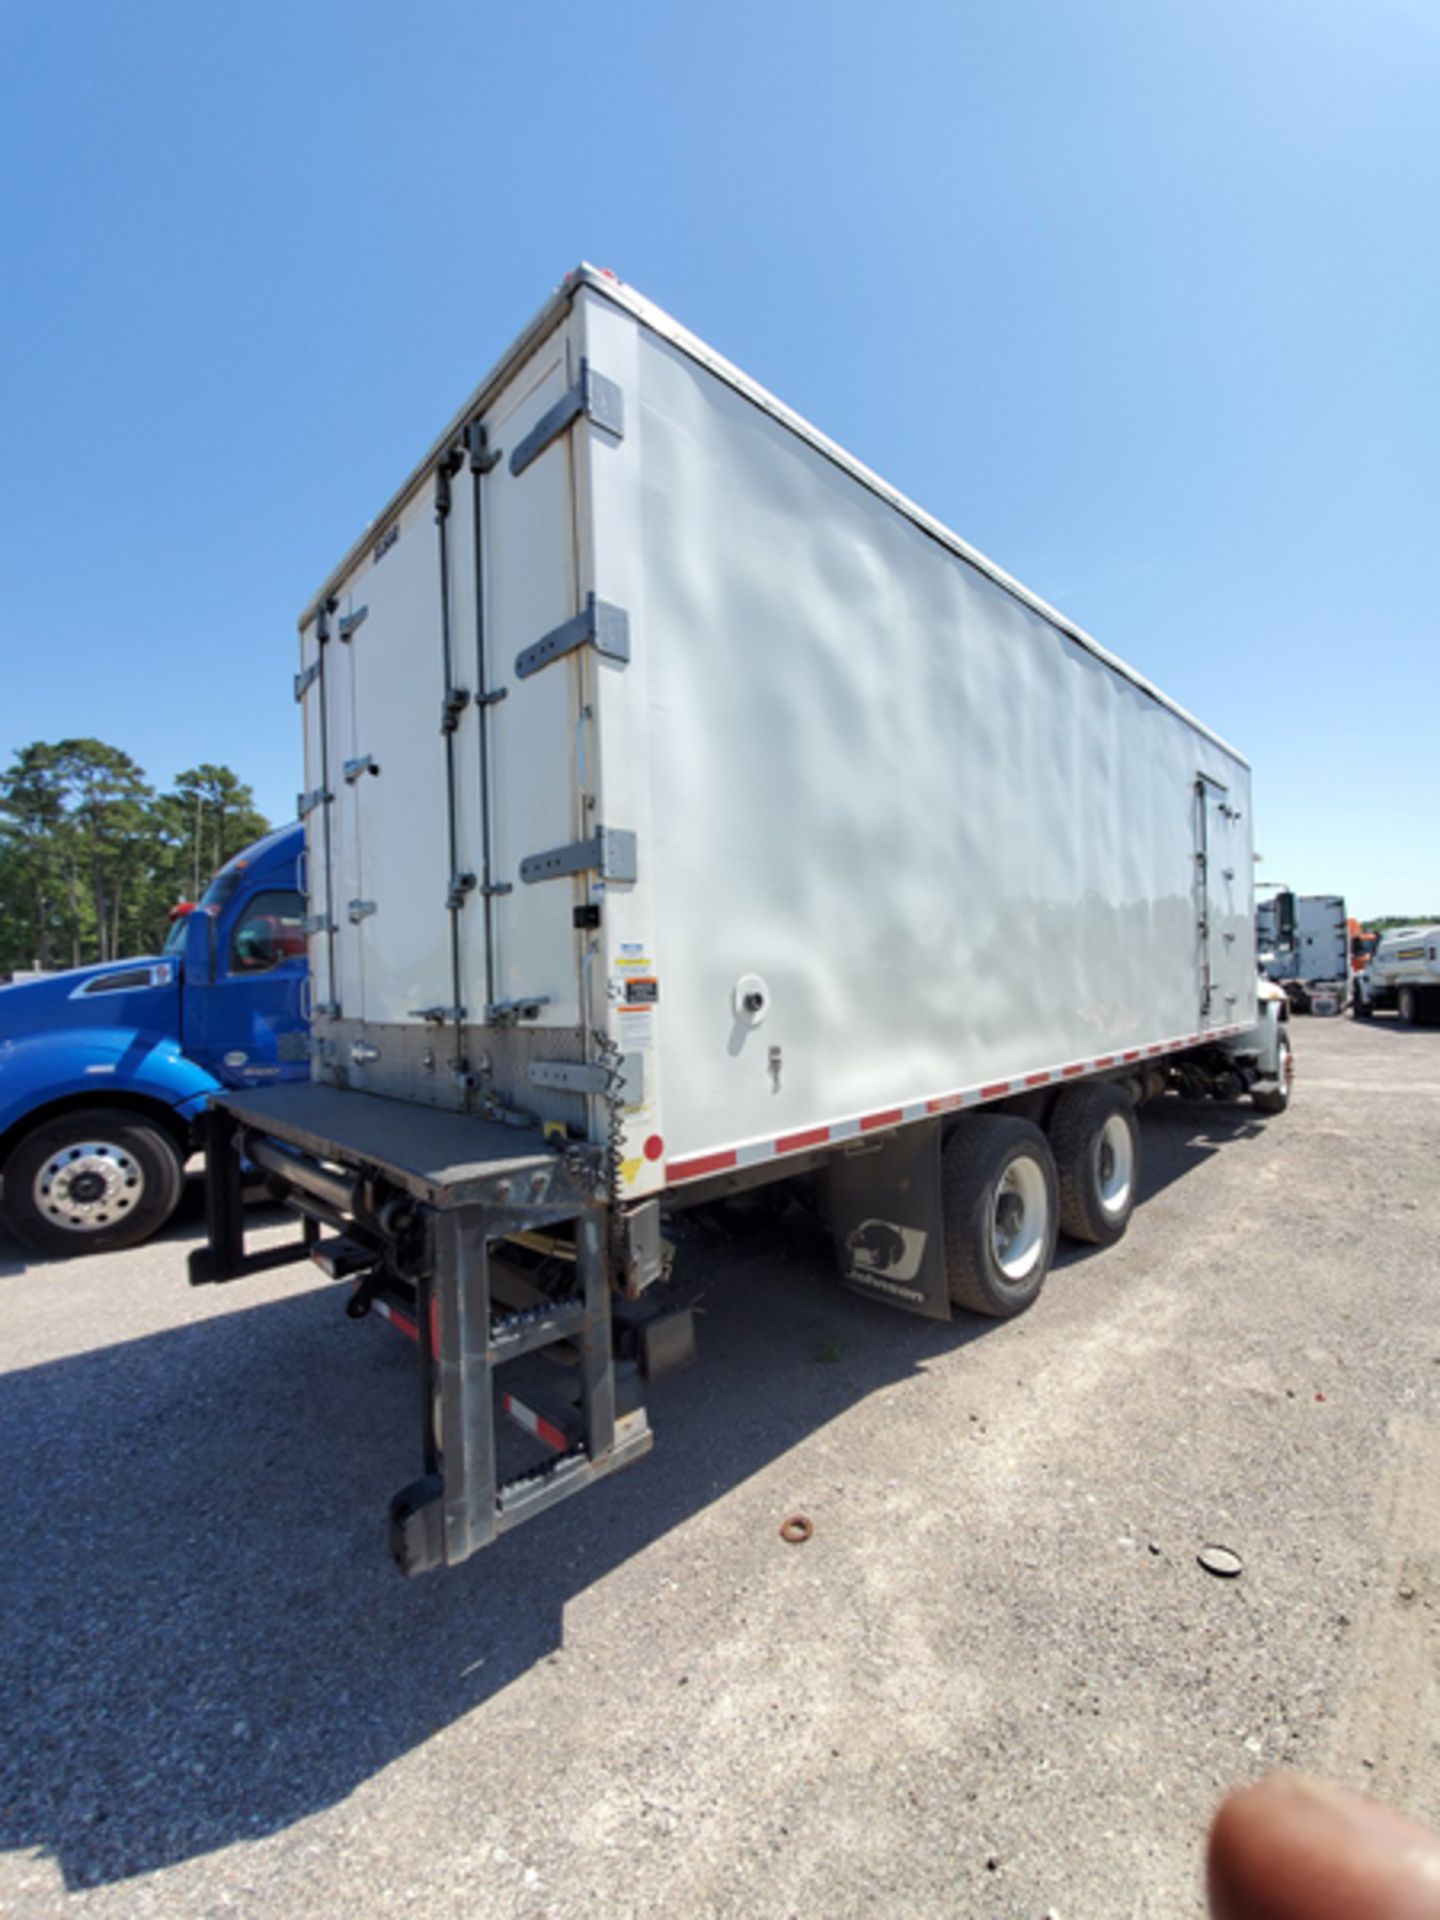 2018 INTERNATIONAL 4400 SBA 6X4 REFRIGERATED BOX TRUCK VIN#: 1HTMSTAR5JH529833, Approx Miles: 26232, - Image 3 of 9